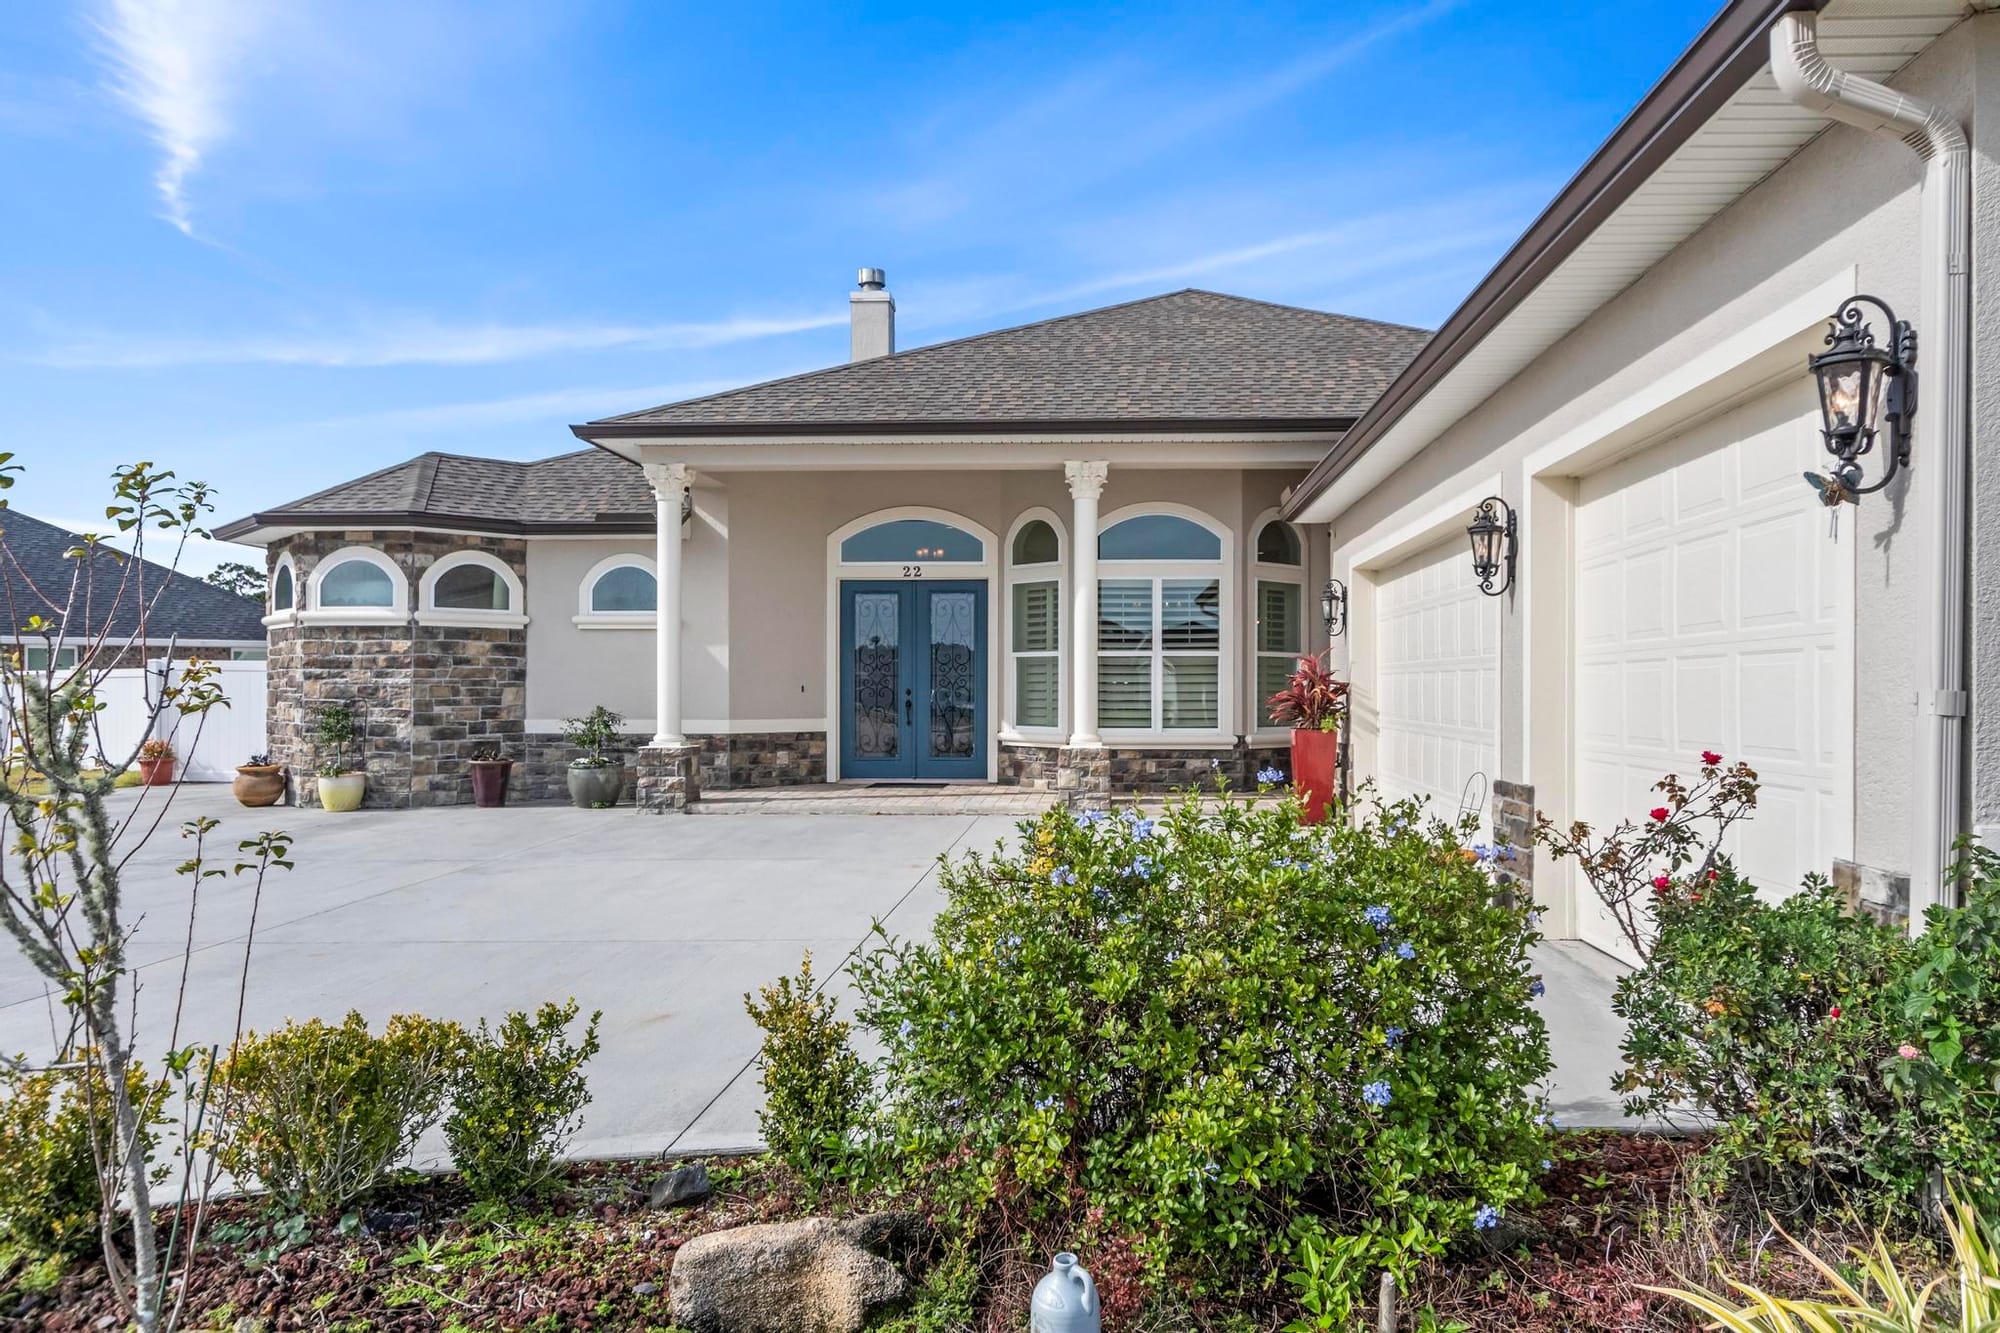 Virtual Open House Feature: Spacious Florida Living- Luxurious Family Home in Eagle Lakes Community